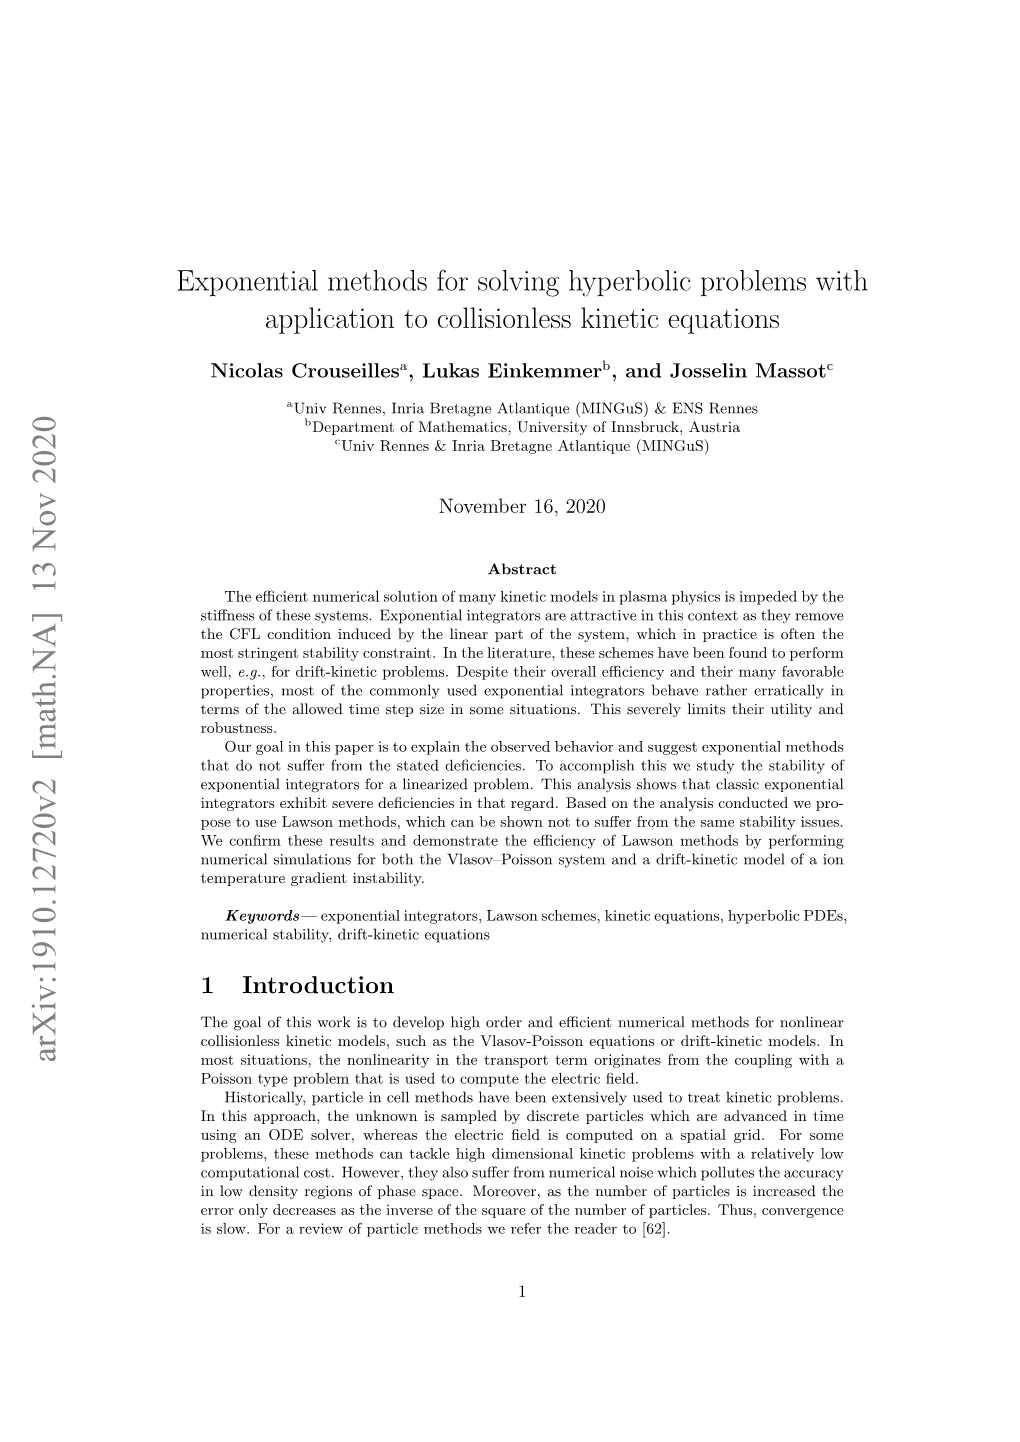 Exponential Methods for Solving Hyperbolic Problems with Application to Collisionless Kinetic Equations